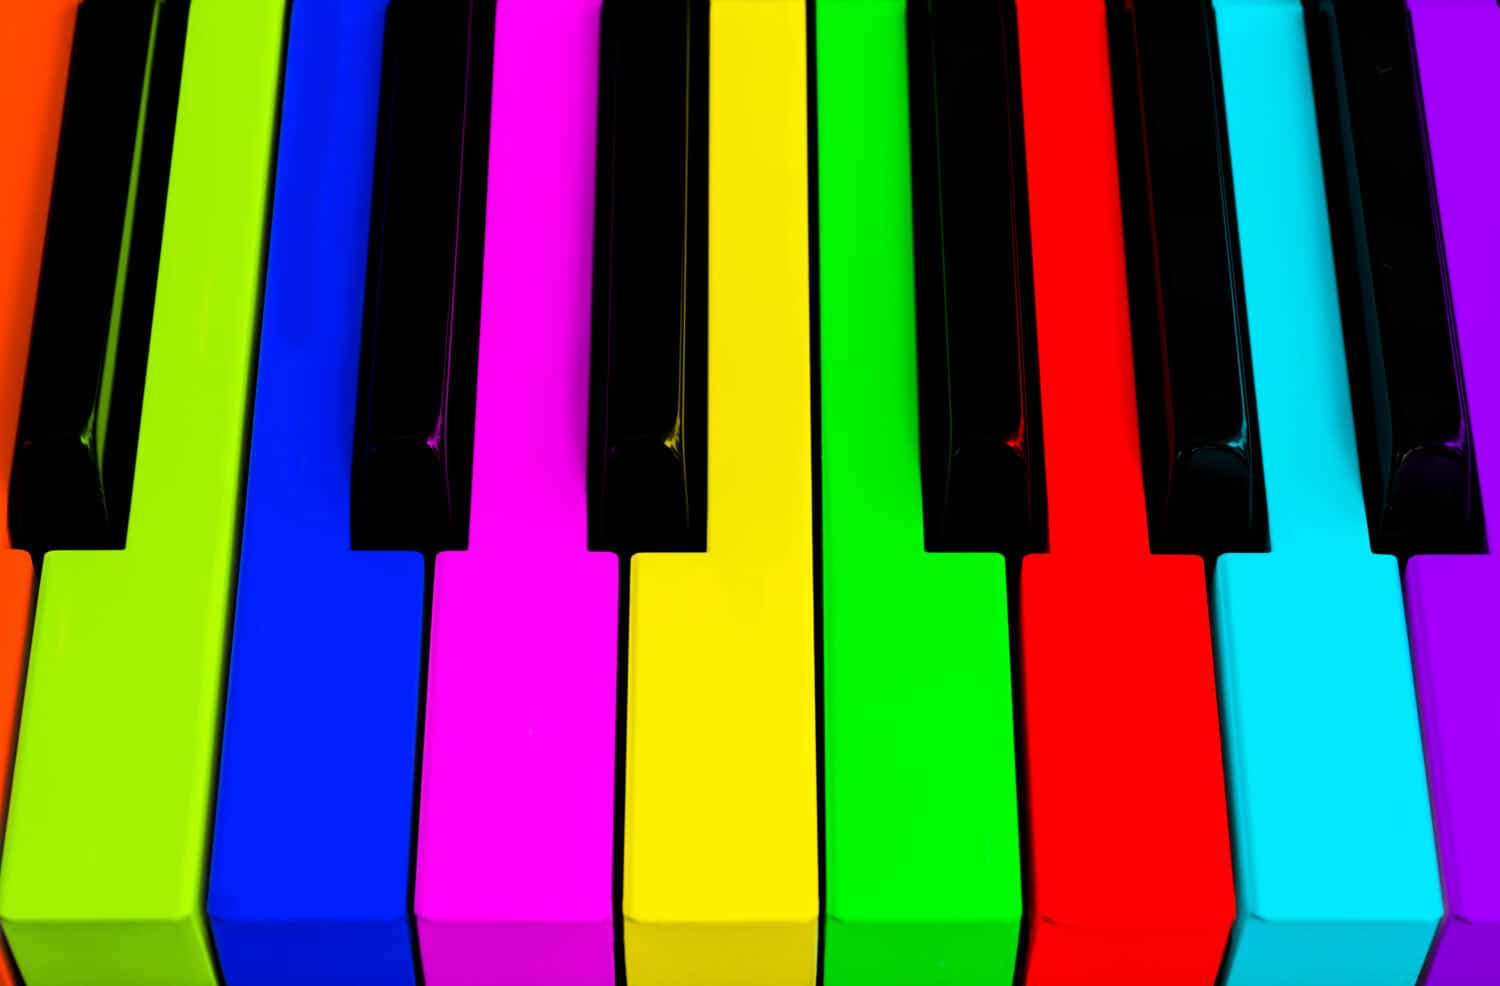 Top view of multicolored piano keys. Close-up of piano keys. Close frontal view. Piano keyboard with selective focus. Top view. Colorful Piano keyboard perspective with red button. Soft lighting